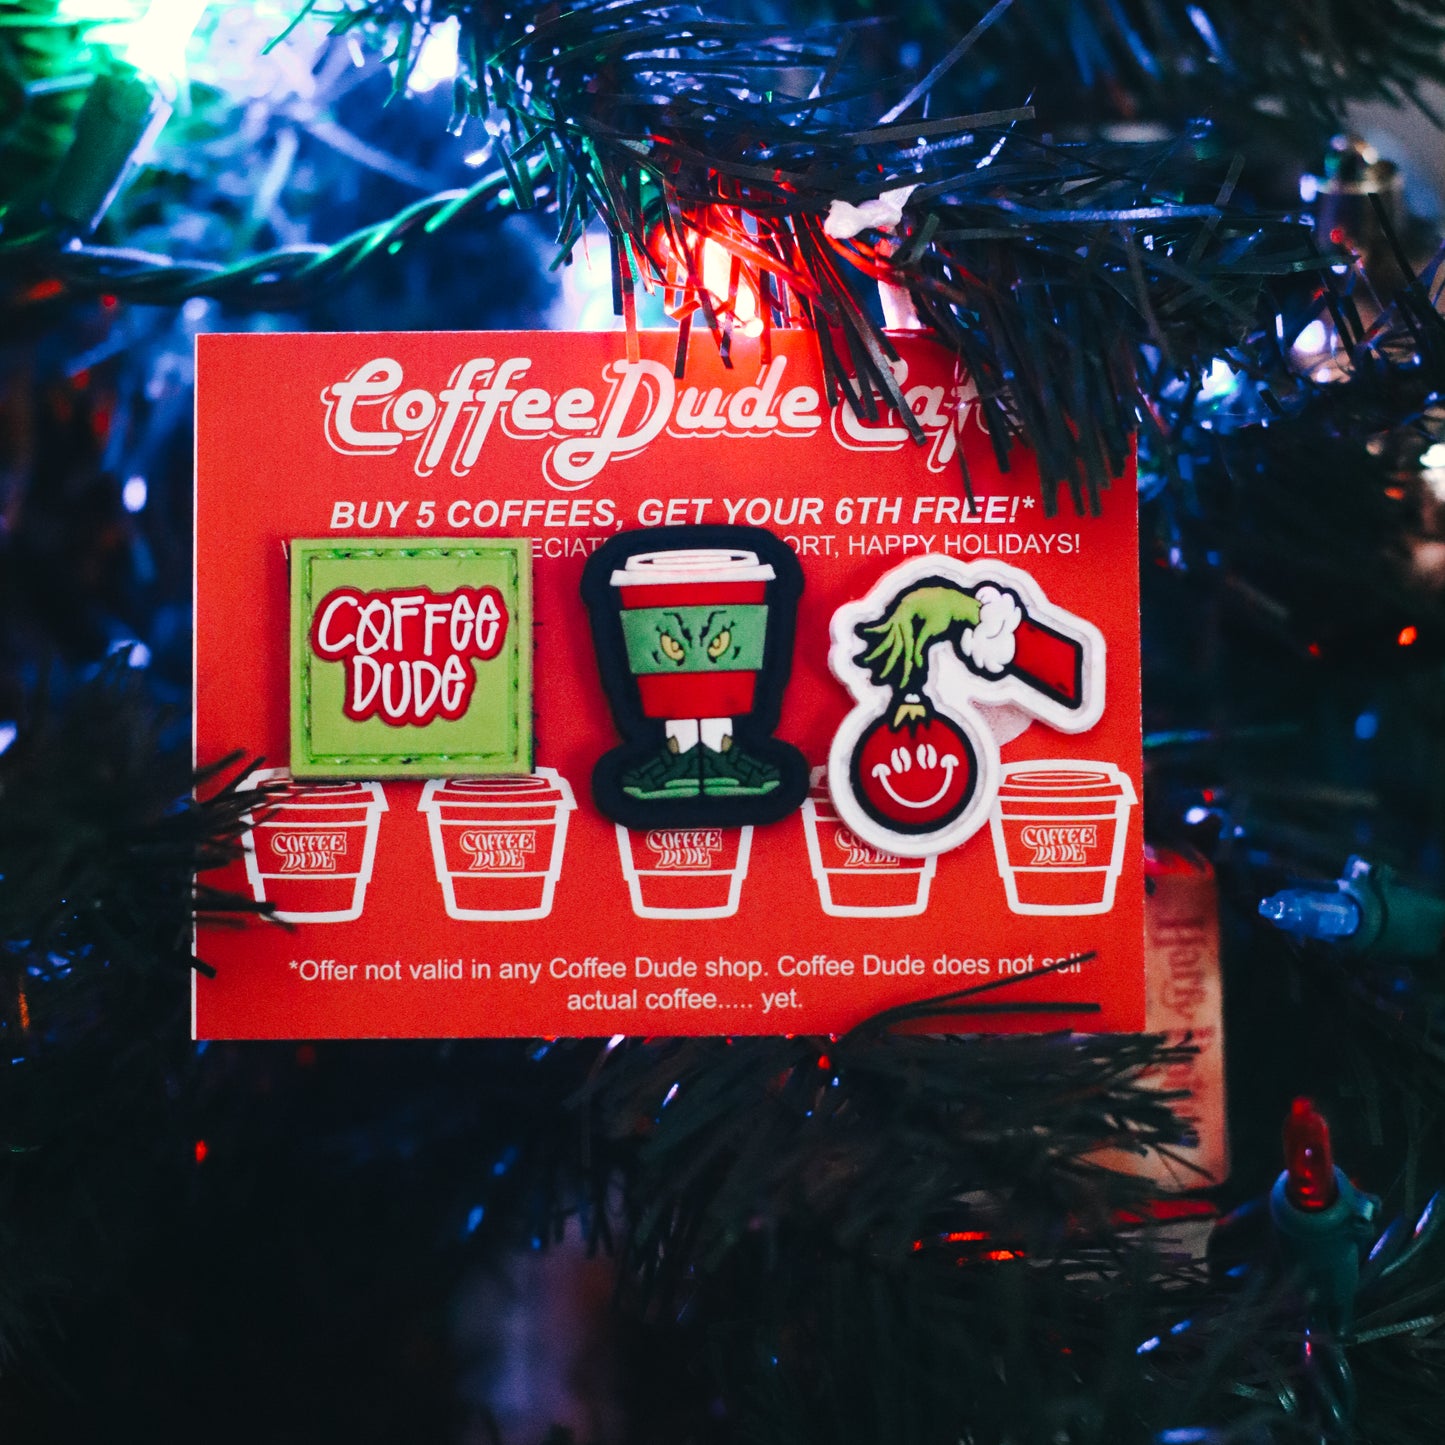 The Grinch Holiday Pack